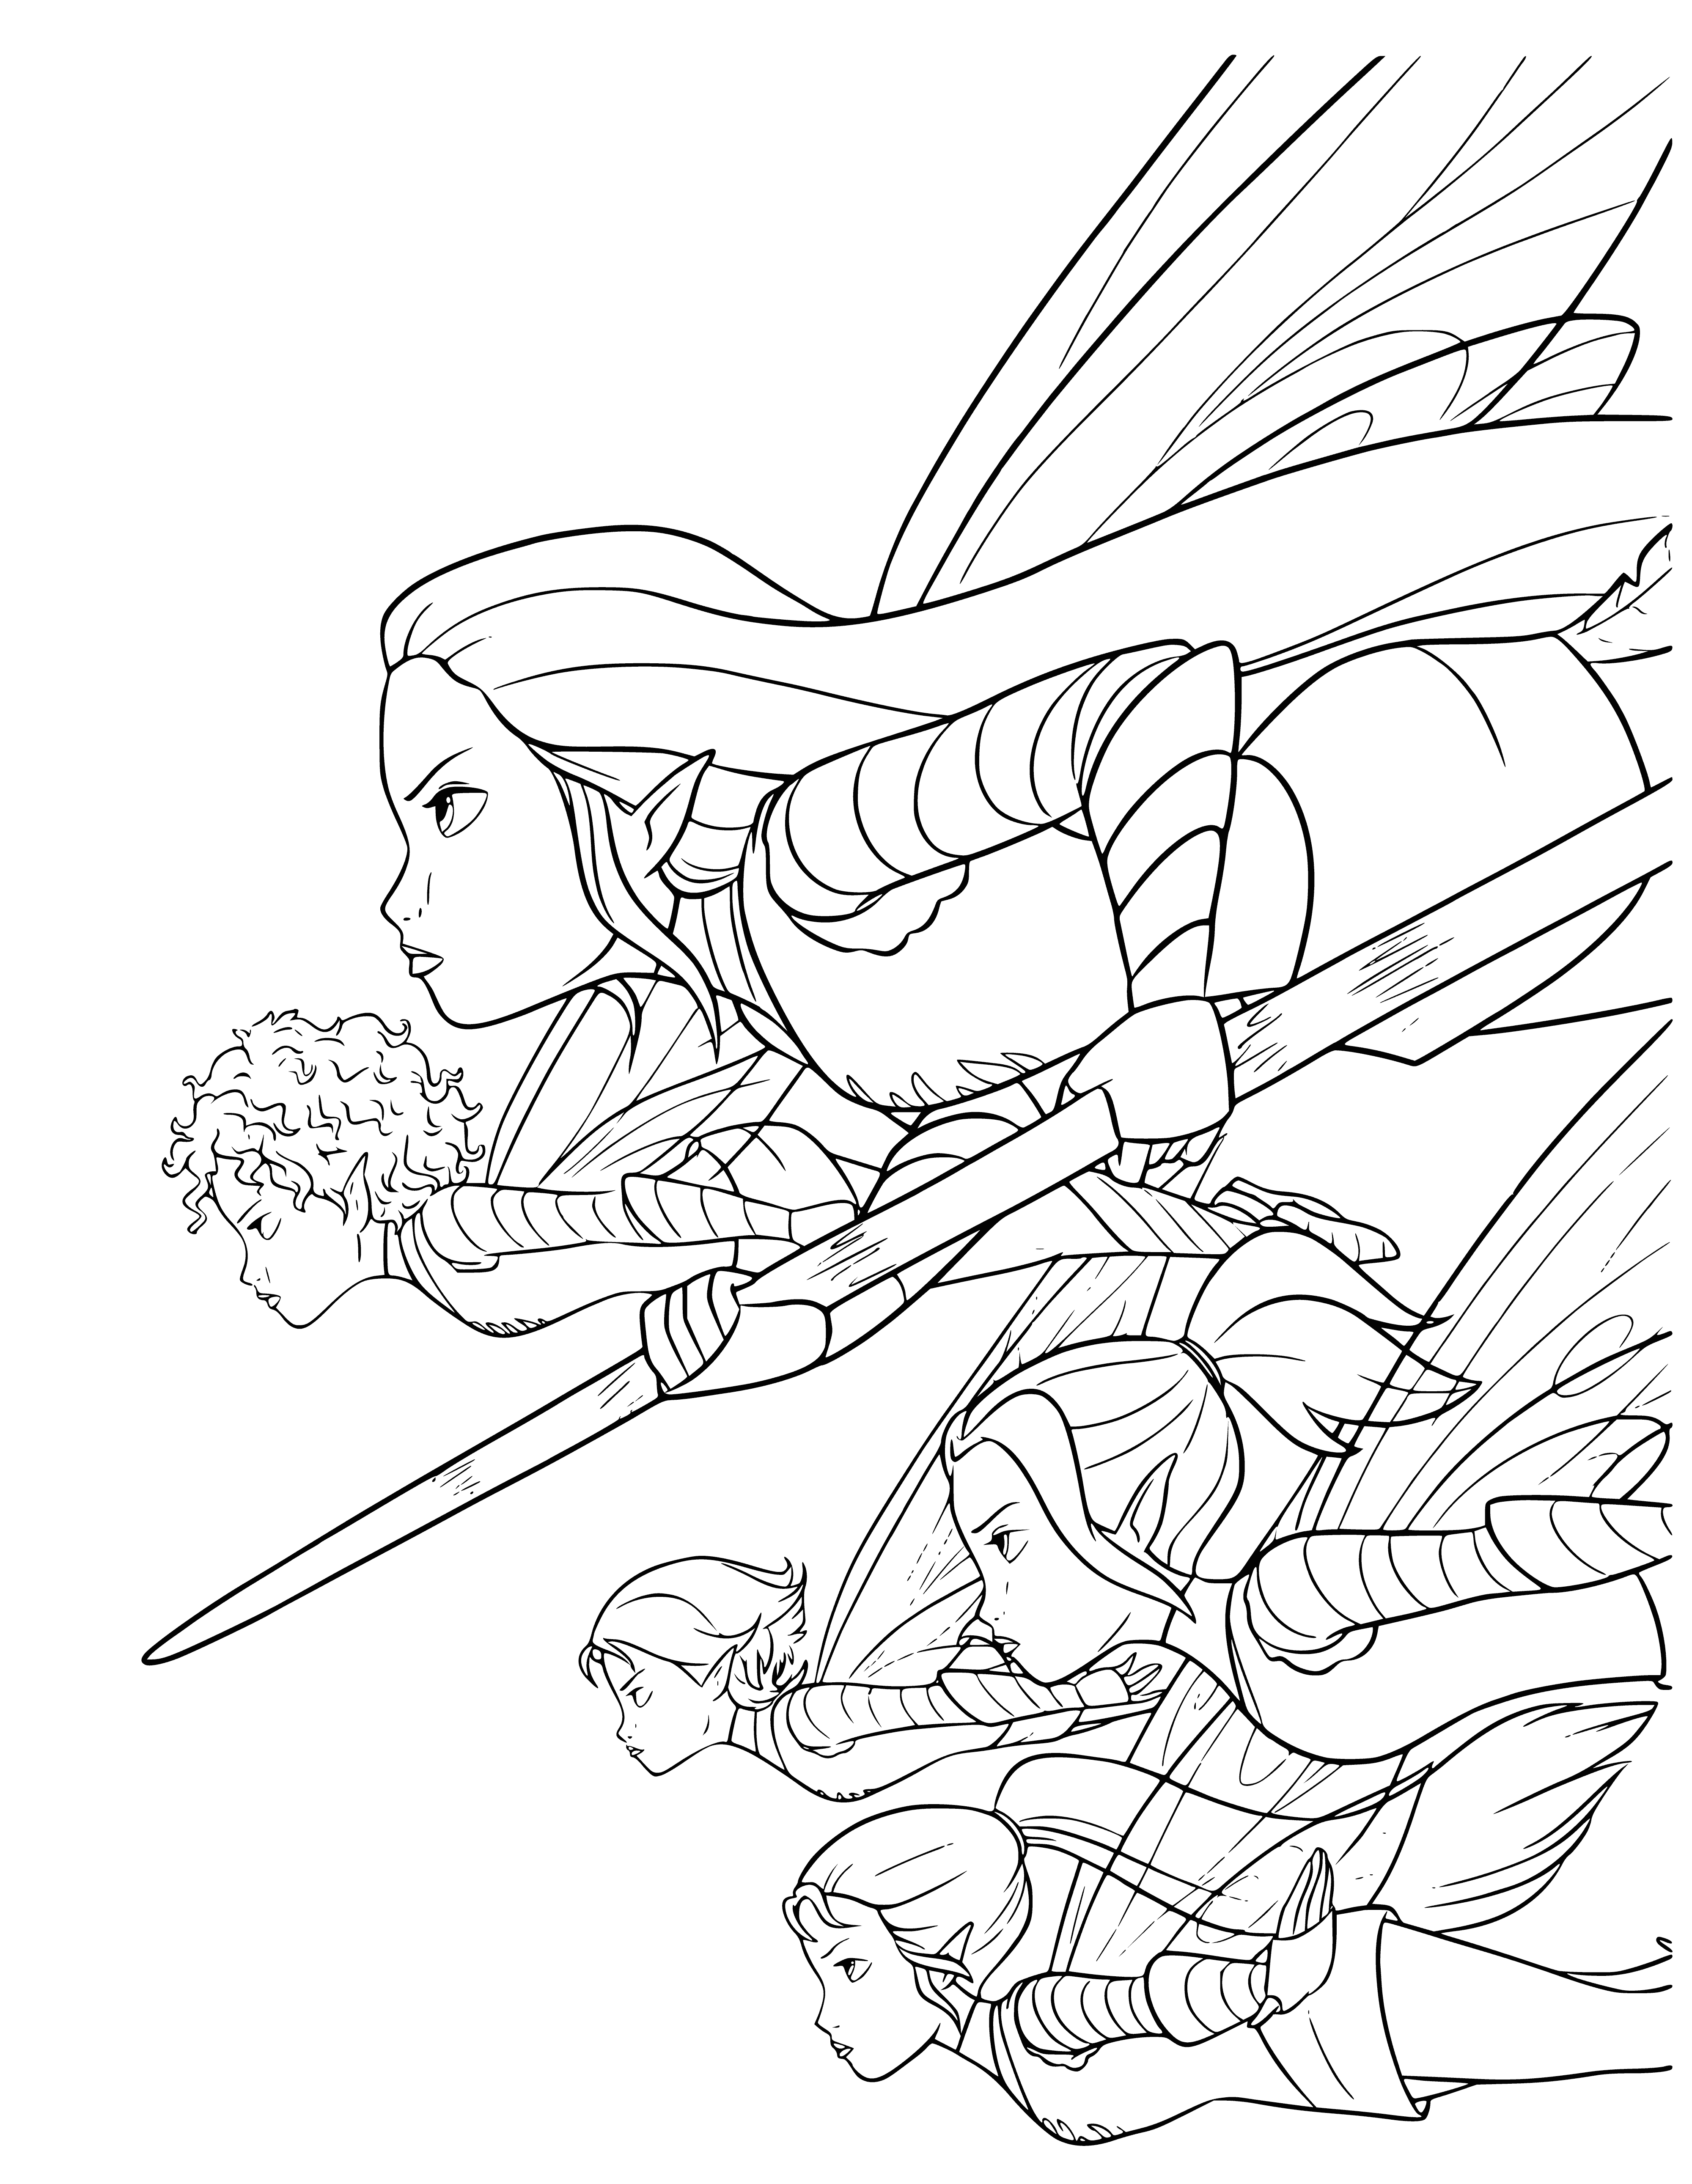 coloring page: Fairies are chasing a Beast through a forest in a battle of will and wit.